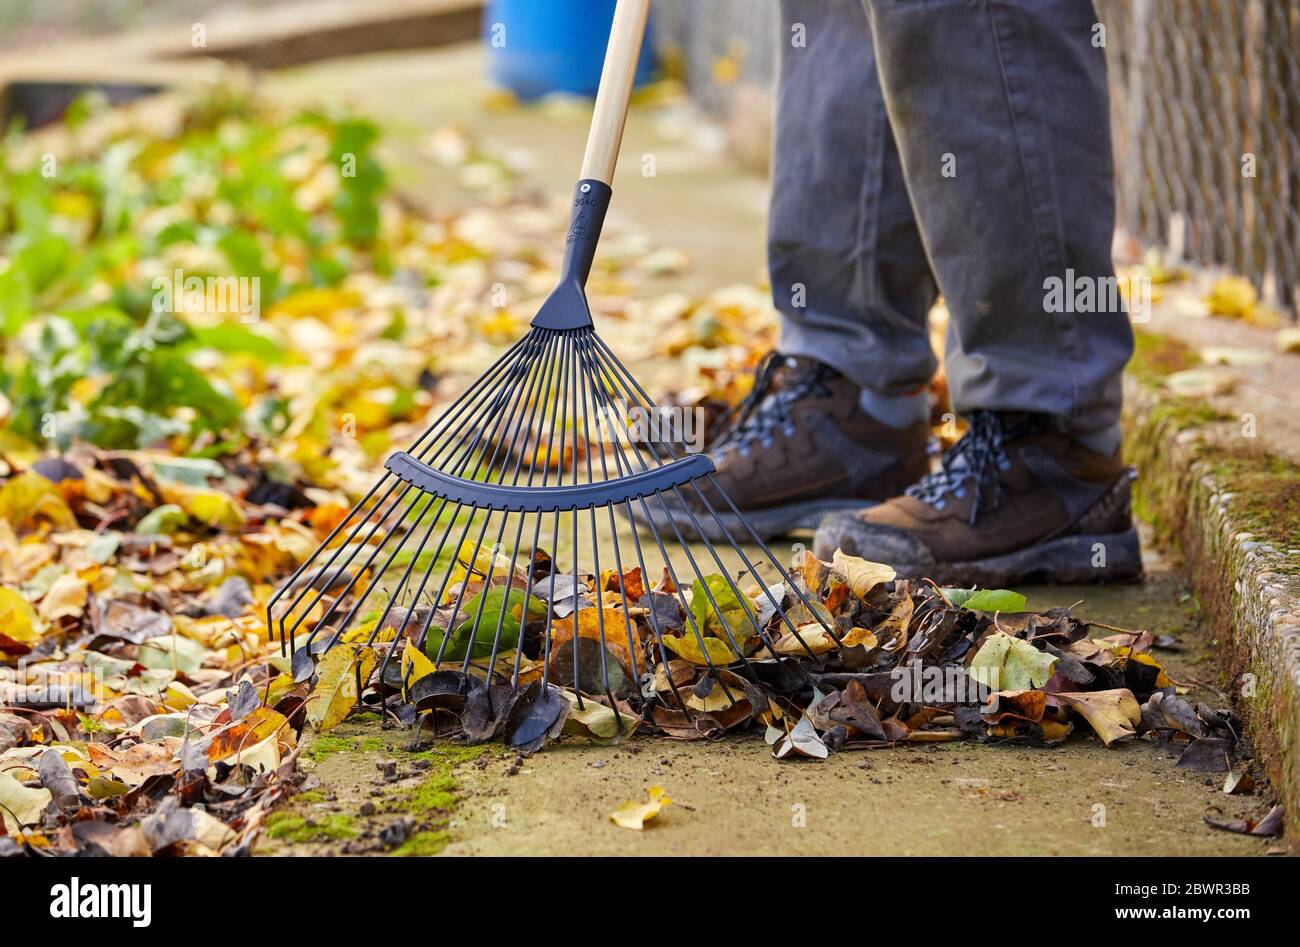 Farmer collecting leaves with a rake, Orchard, Calahorra, La Rioja, Spain, Europe Stock Photo